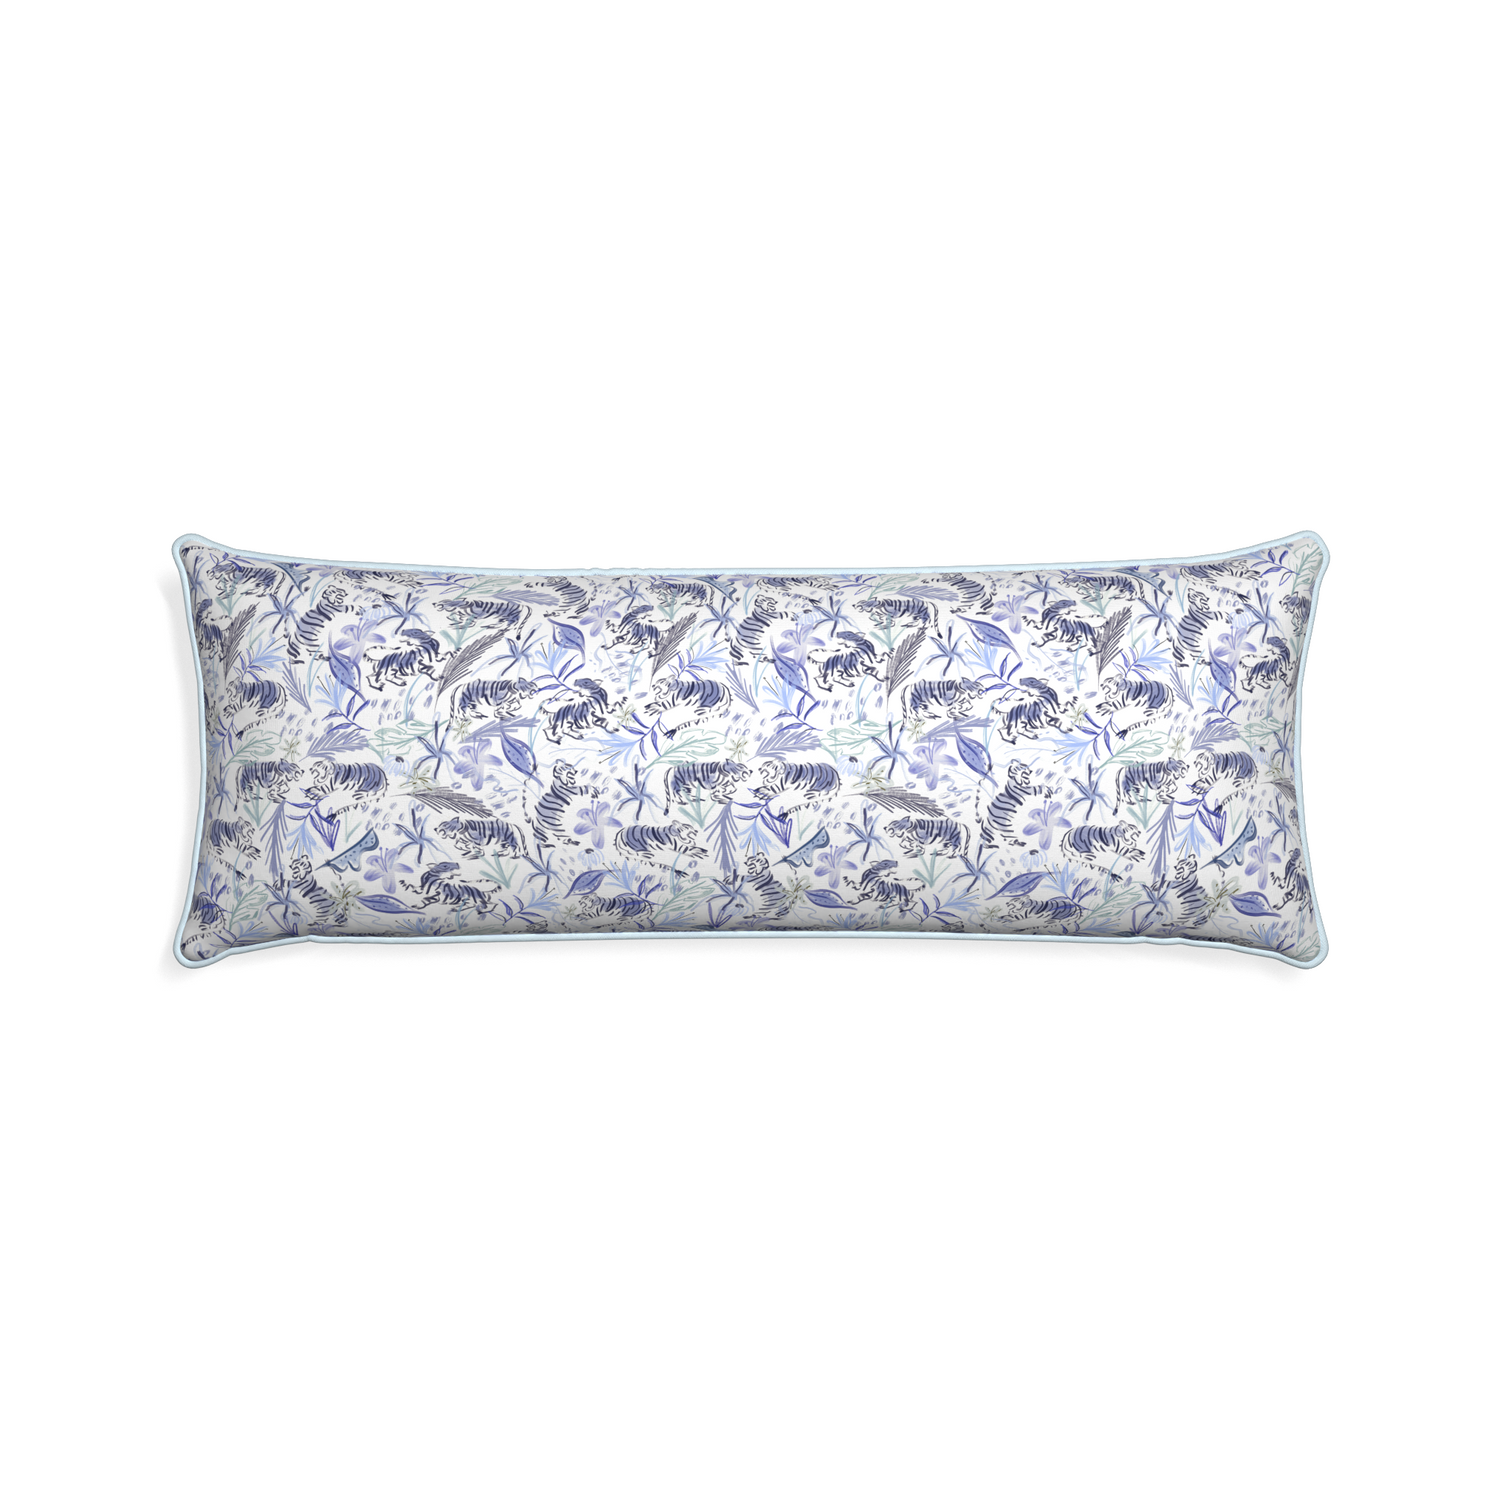 Xl-lumbar frida blue custom blue with intricate tiger designpillow with powder piping on white background